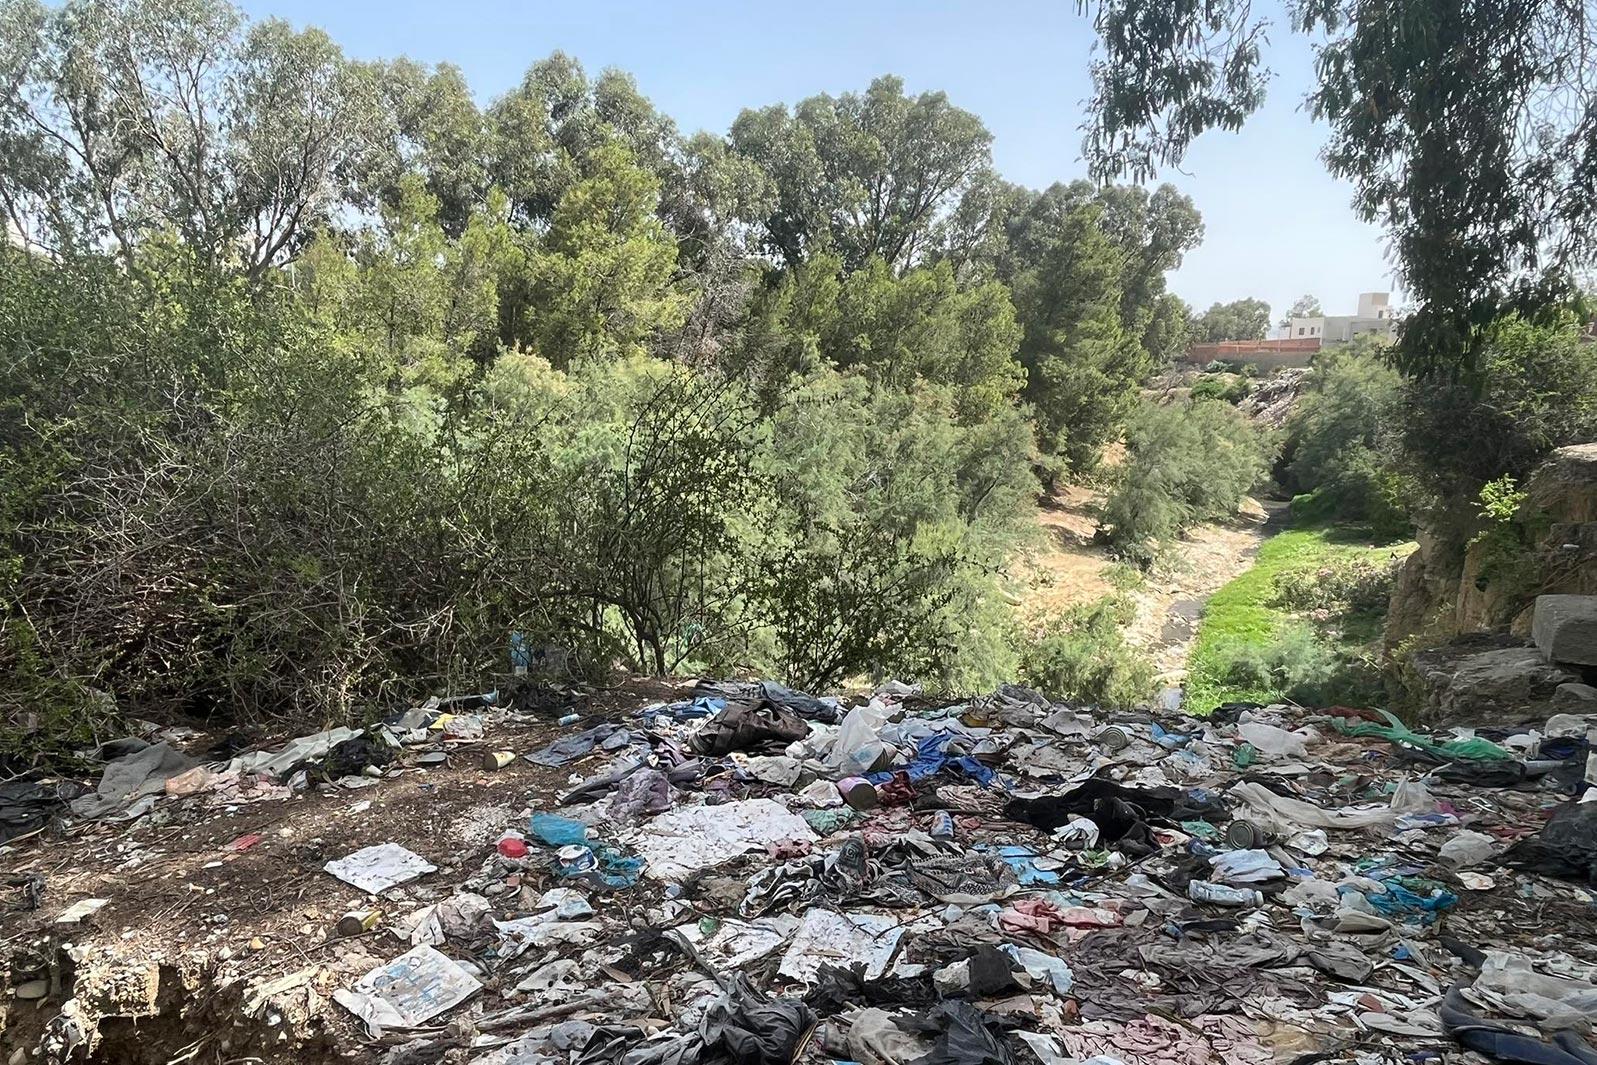 In Siliana, a regional hospital and animal slaughterhouse dump their water and plastic waste in a river used by citizens and farmers for agricultural activities, polluting crops and contributing to illnesses in the community. (Sabrine Laribi/USIP)